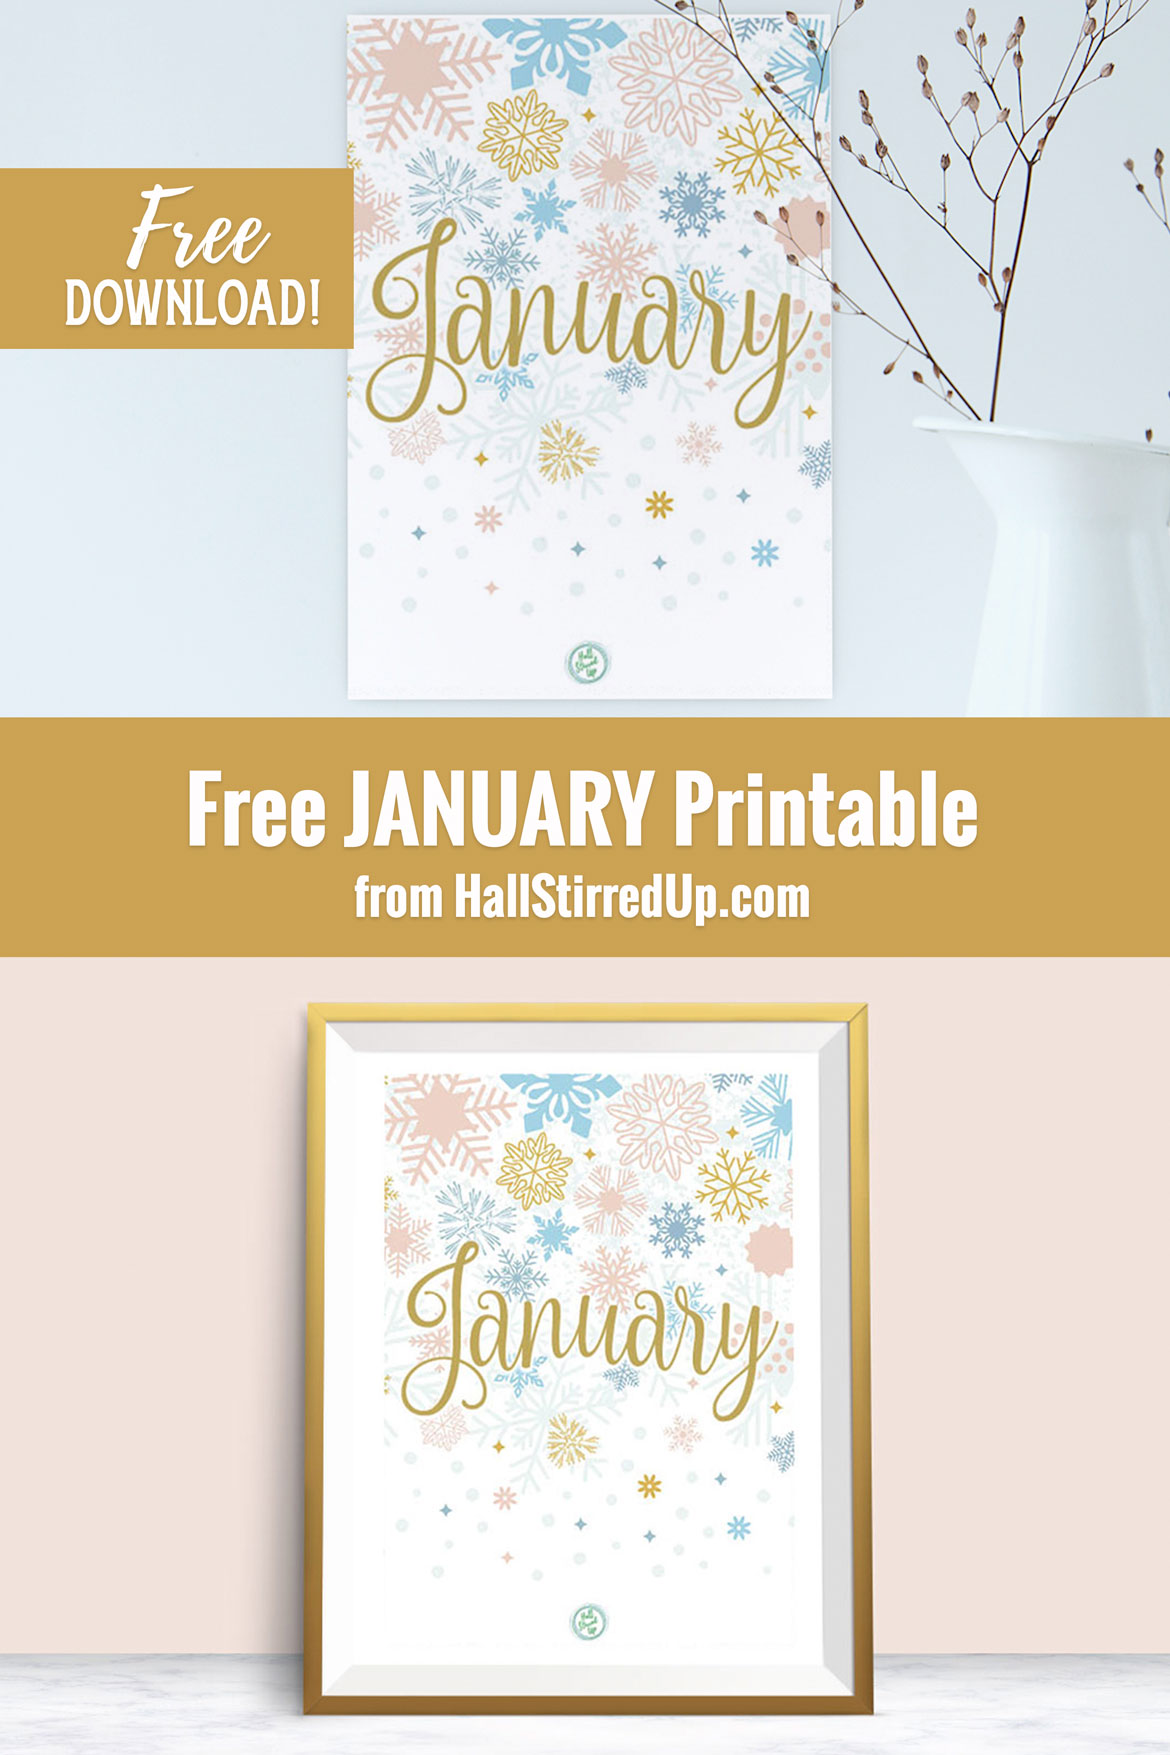 A new month a new year and a new January free printable